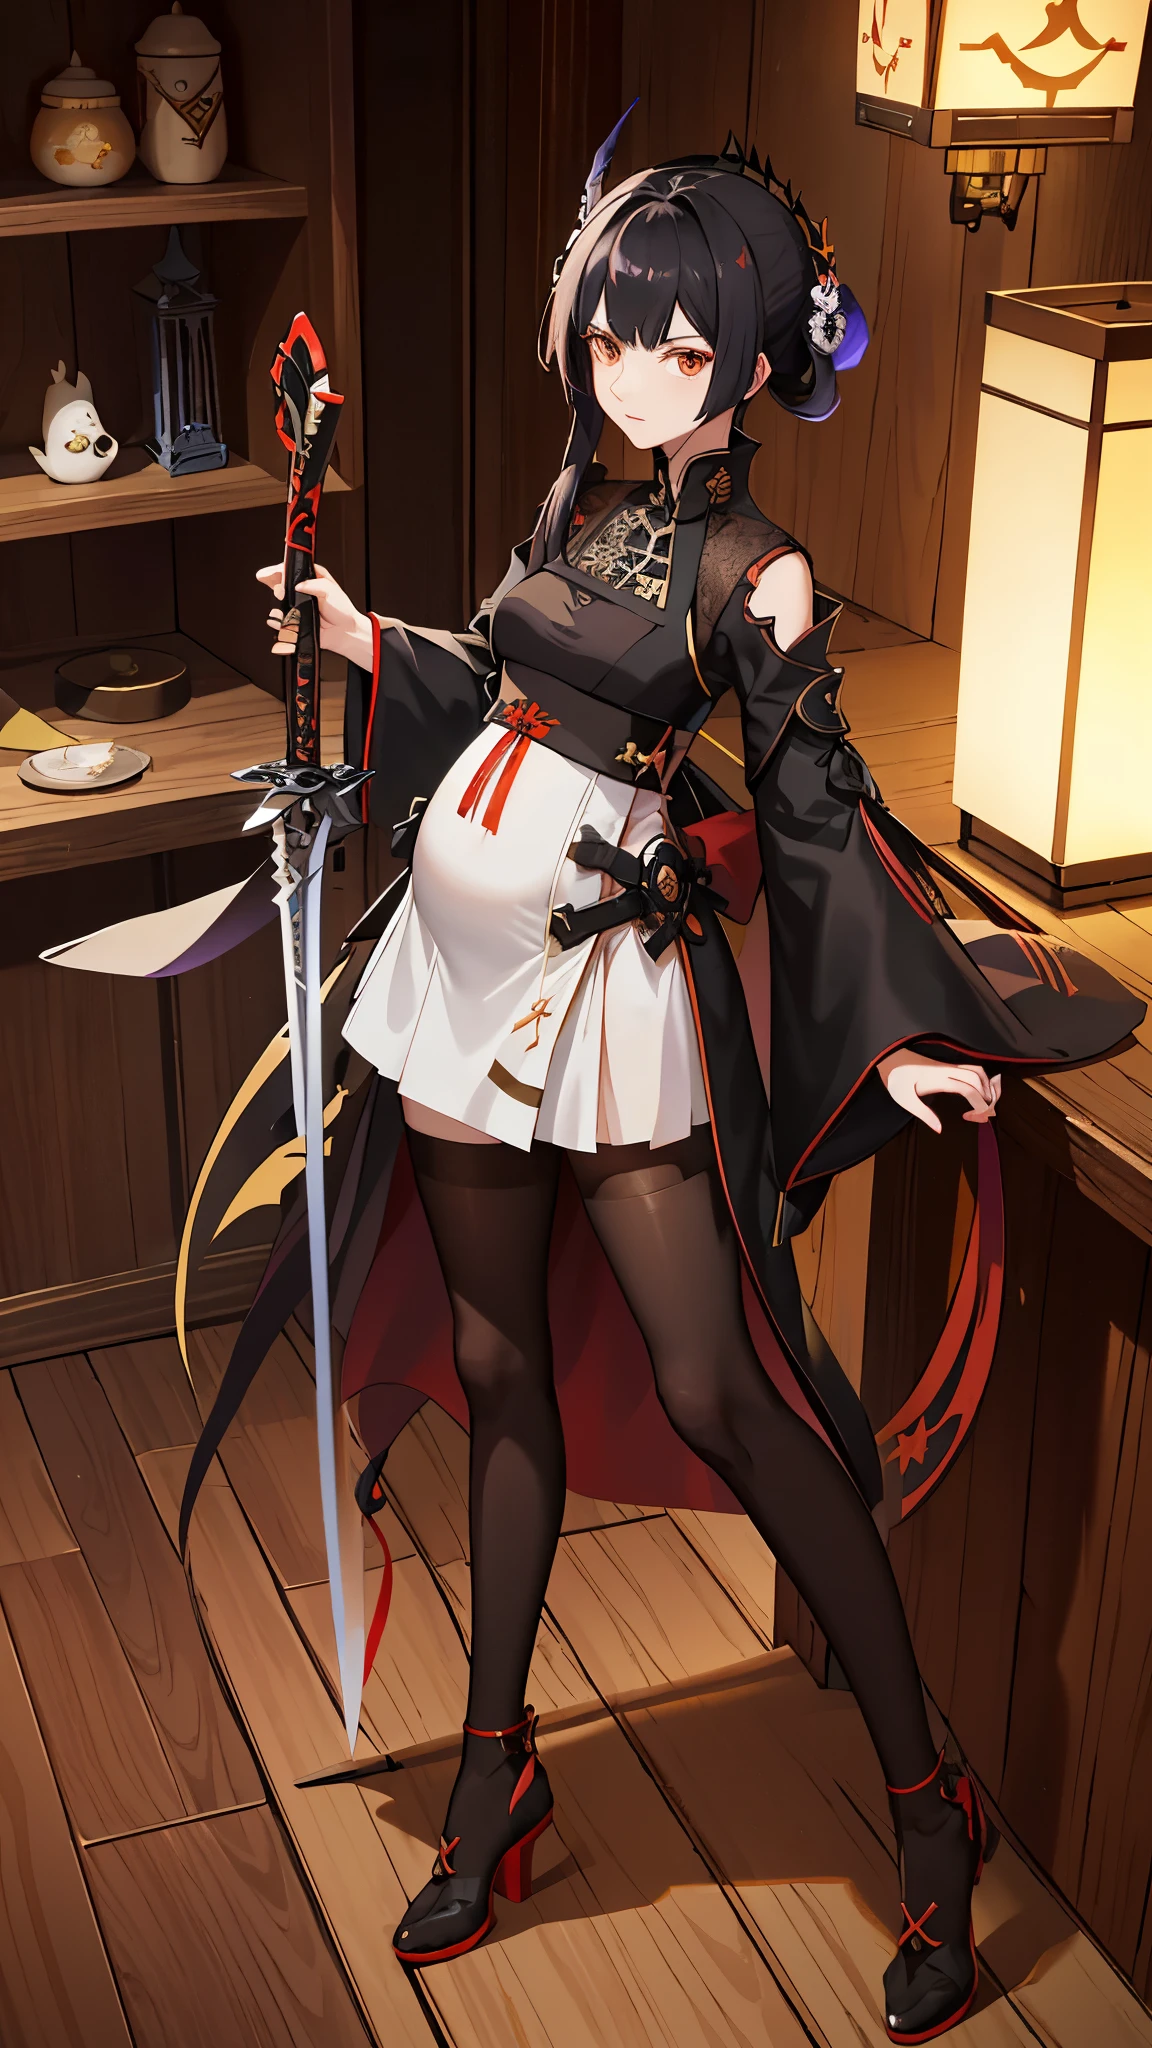 a woman in a dress holding a dagger and a dagger, video game character, from arknights, fox nobushi holding a dagger, hajime yatate, keqing from genshin impact, black haired deity, with small sword, ayaka genshin impact, female action anime girl, official character art, anime character, pregnant anime girl, fetus